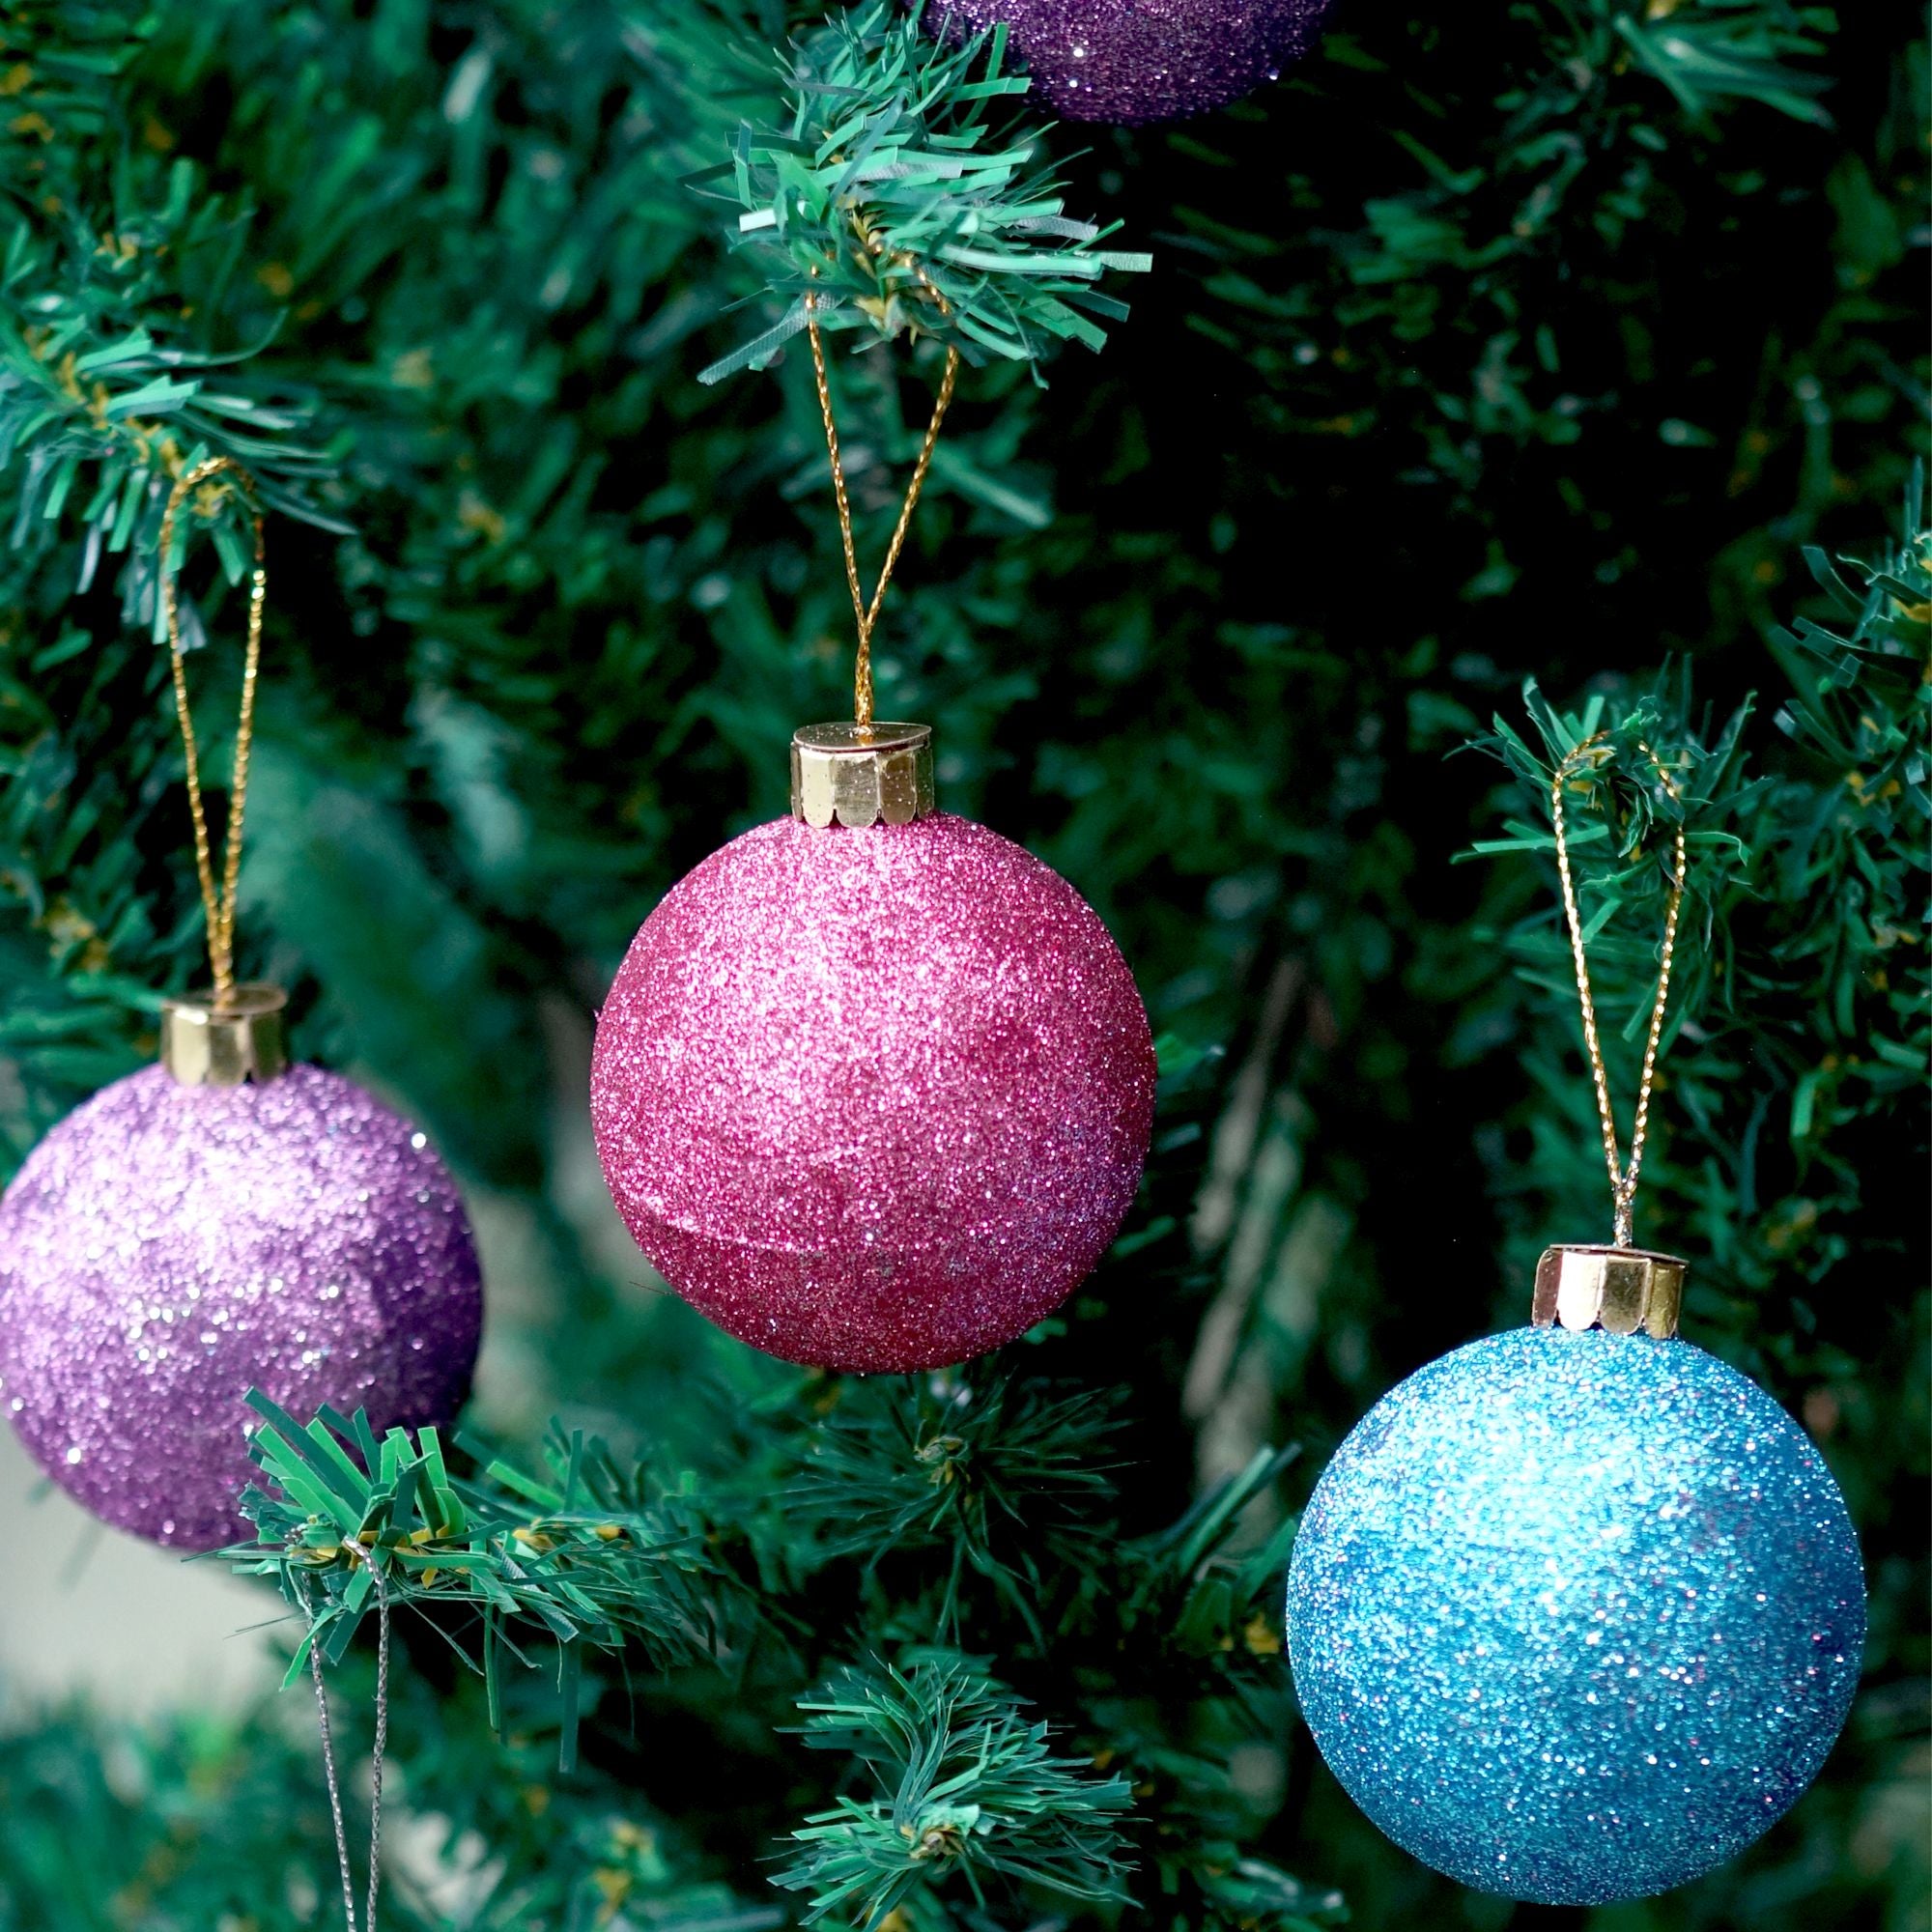 Handmade Christmas Ornaments - Glitter Baubles, 60mm, Assorted Colours Blue, Purple, Silver, Pink, 6pc